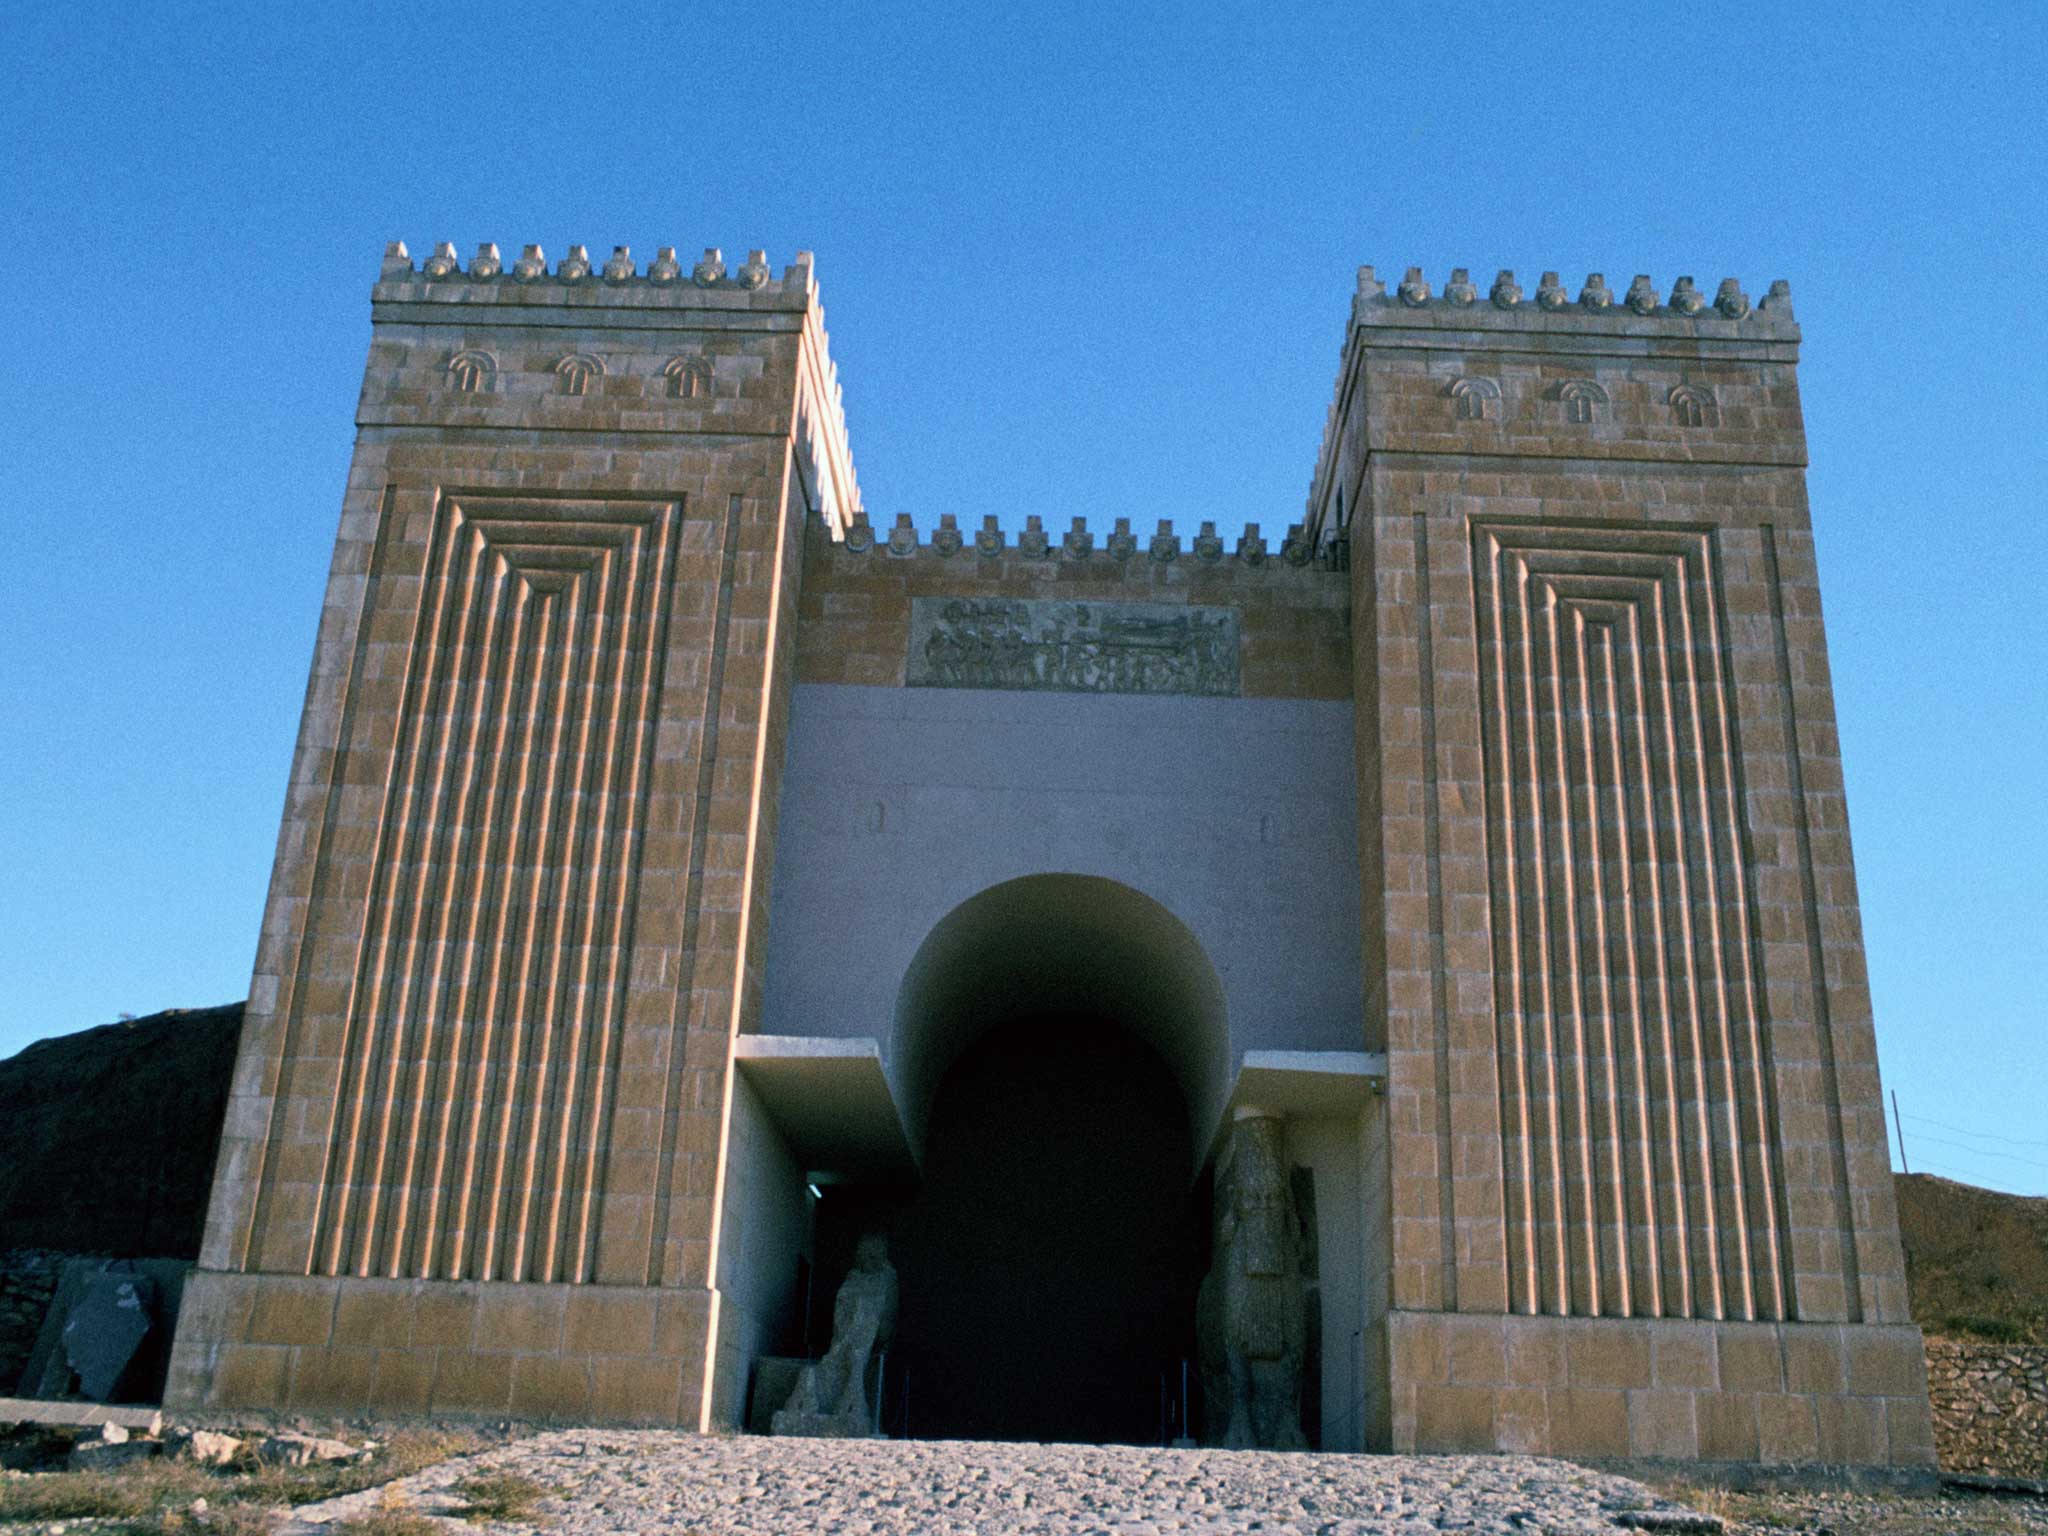 Nergal Gate in the ancient city of Ninevah in northern Iraq